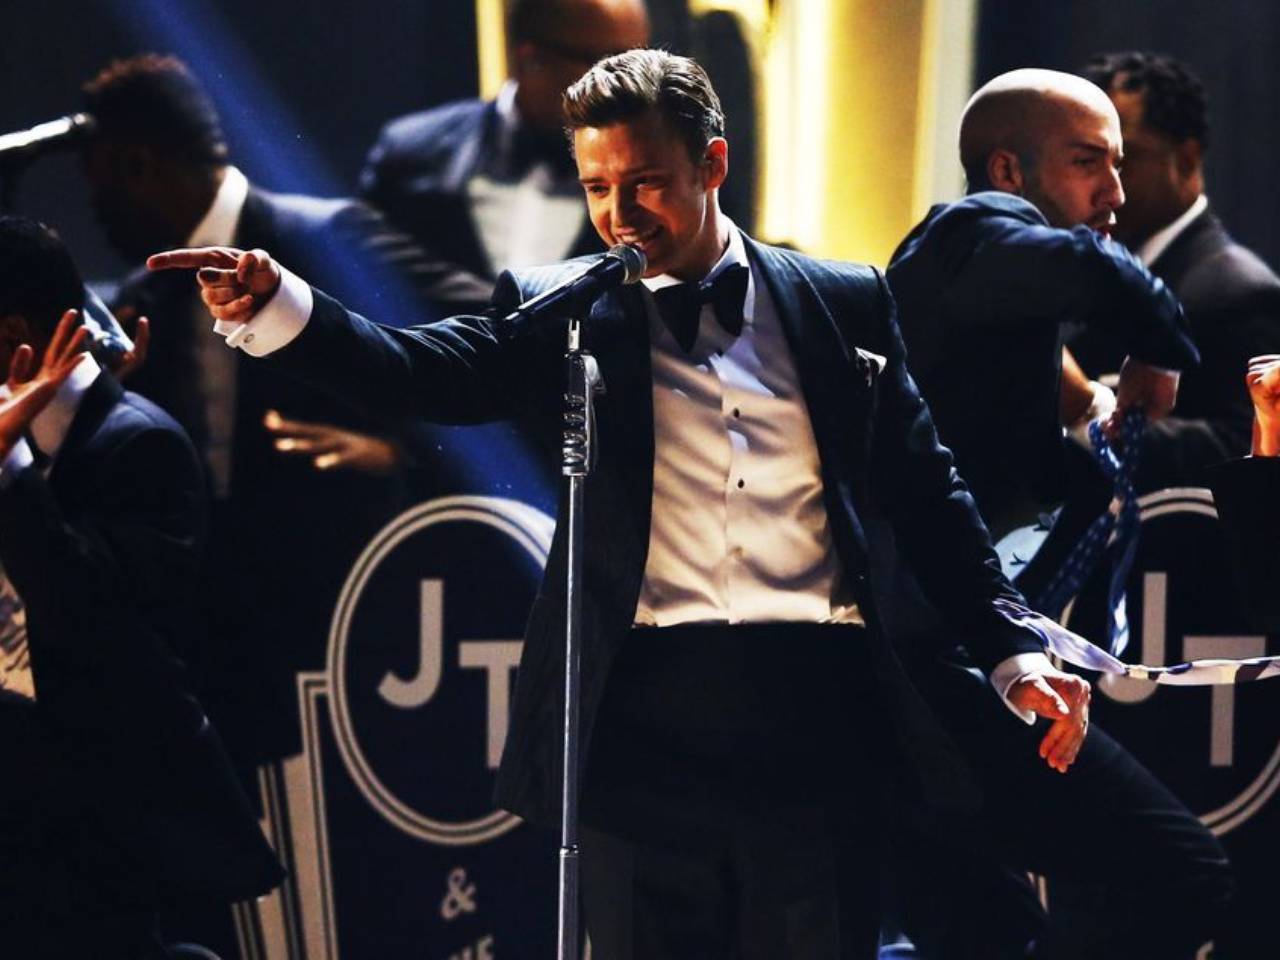 Justin Timberlake is about to release his first song since 2013